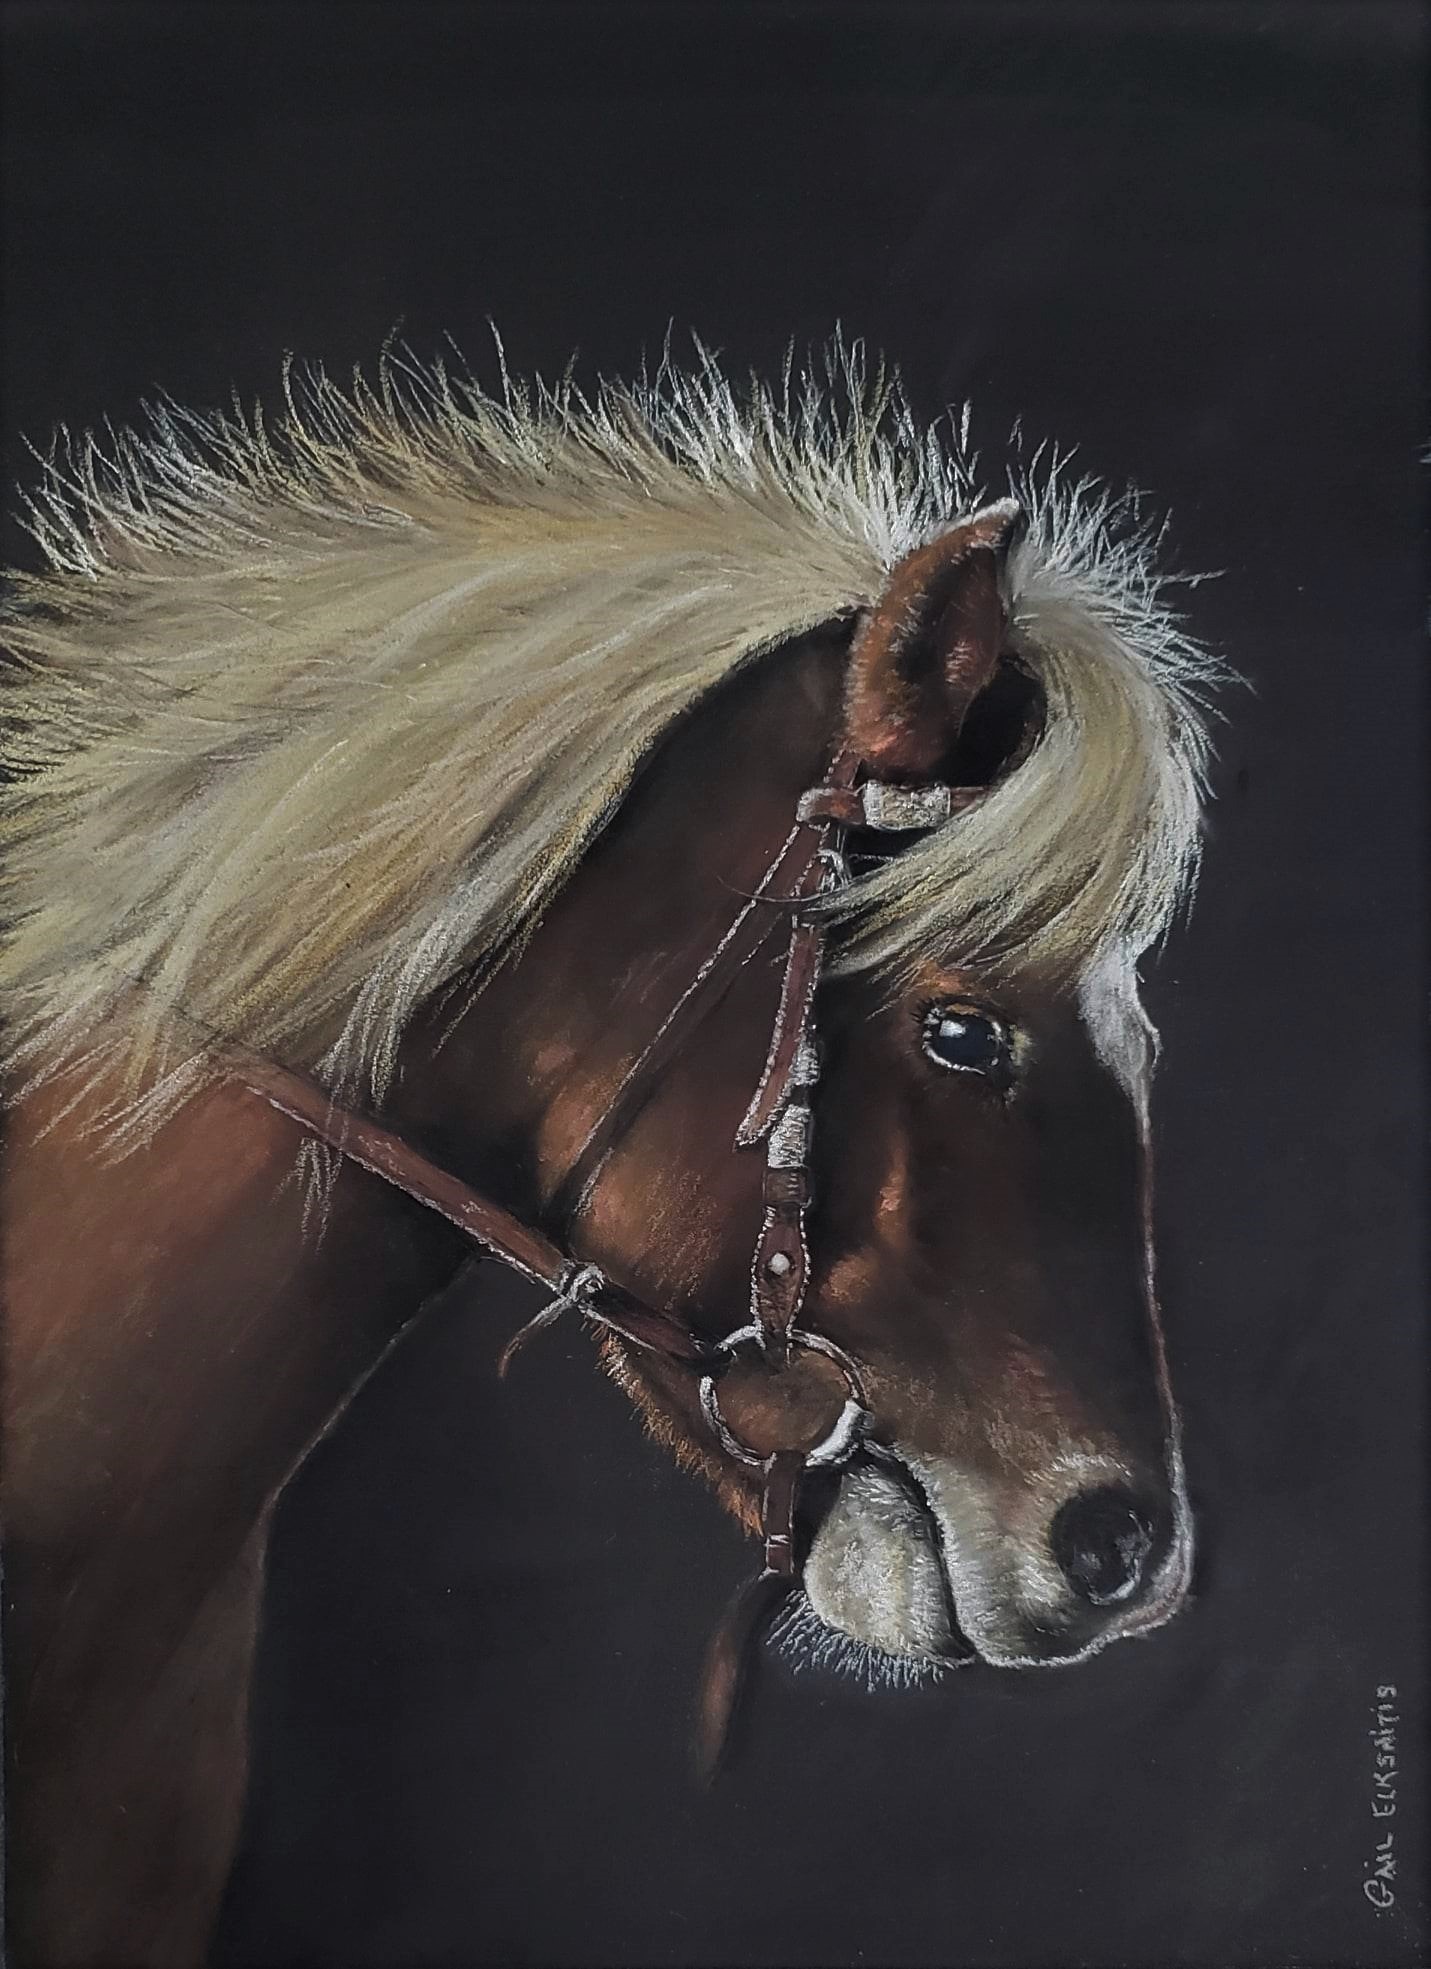 Painted portrait of a pony wearing a bridle against a black background